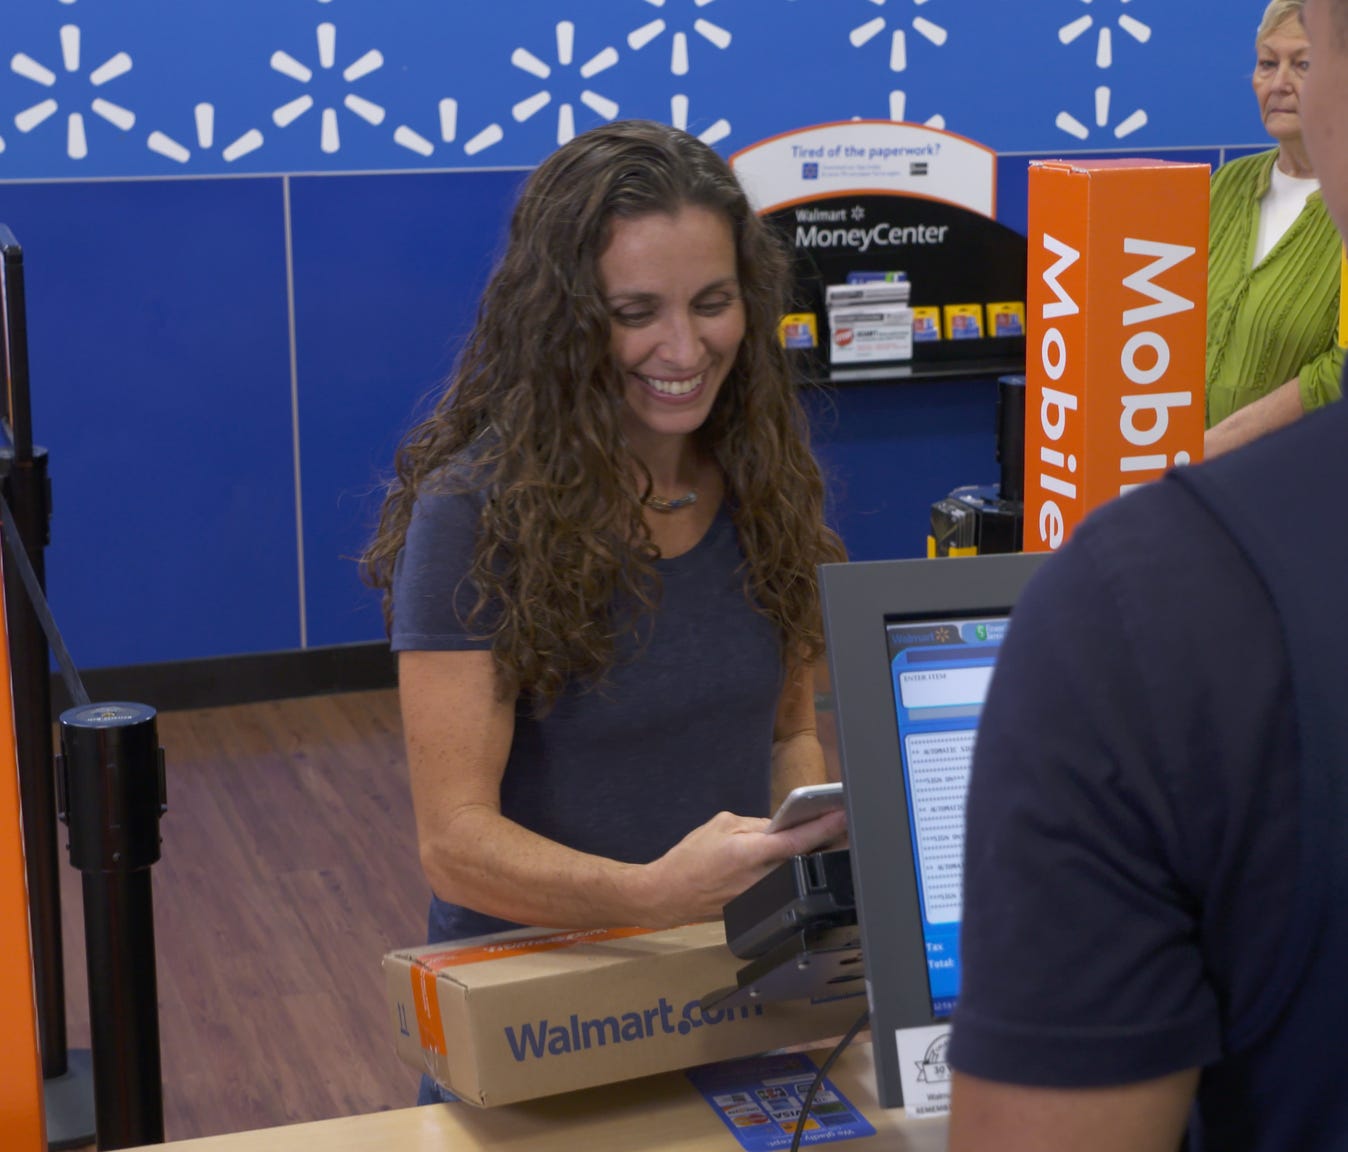 Walmart is trying to speed up the returns process by encouraging shoppers to use its mobile app.